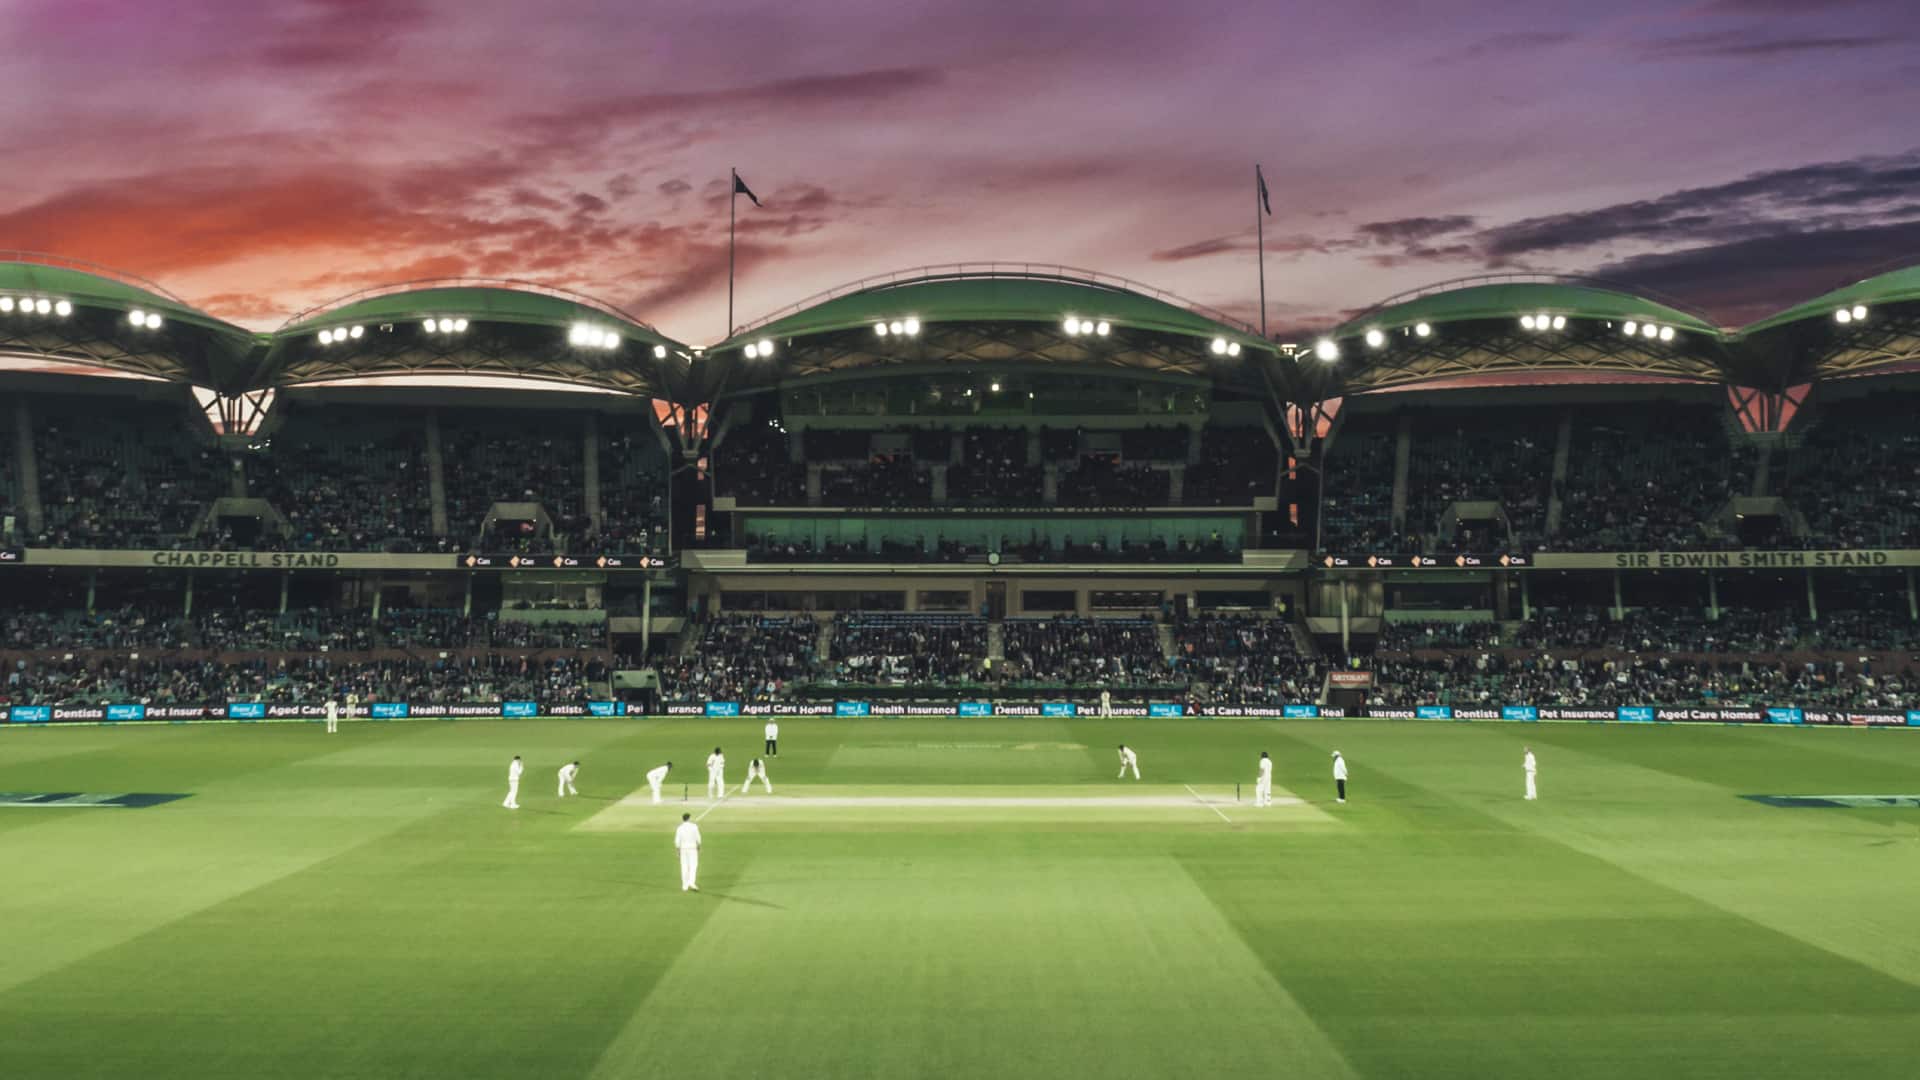 How to Stream 2020 Cricket Matches in the US